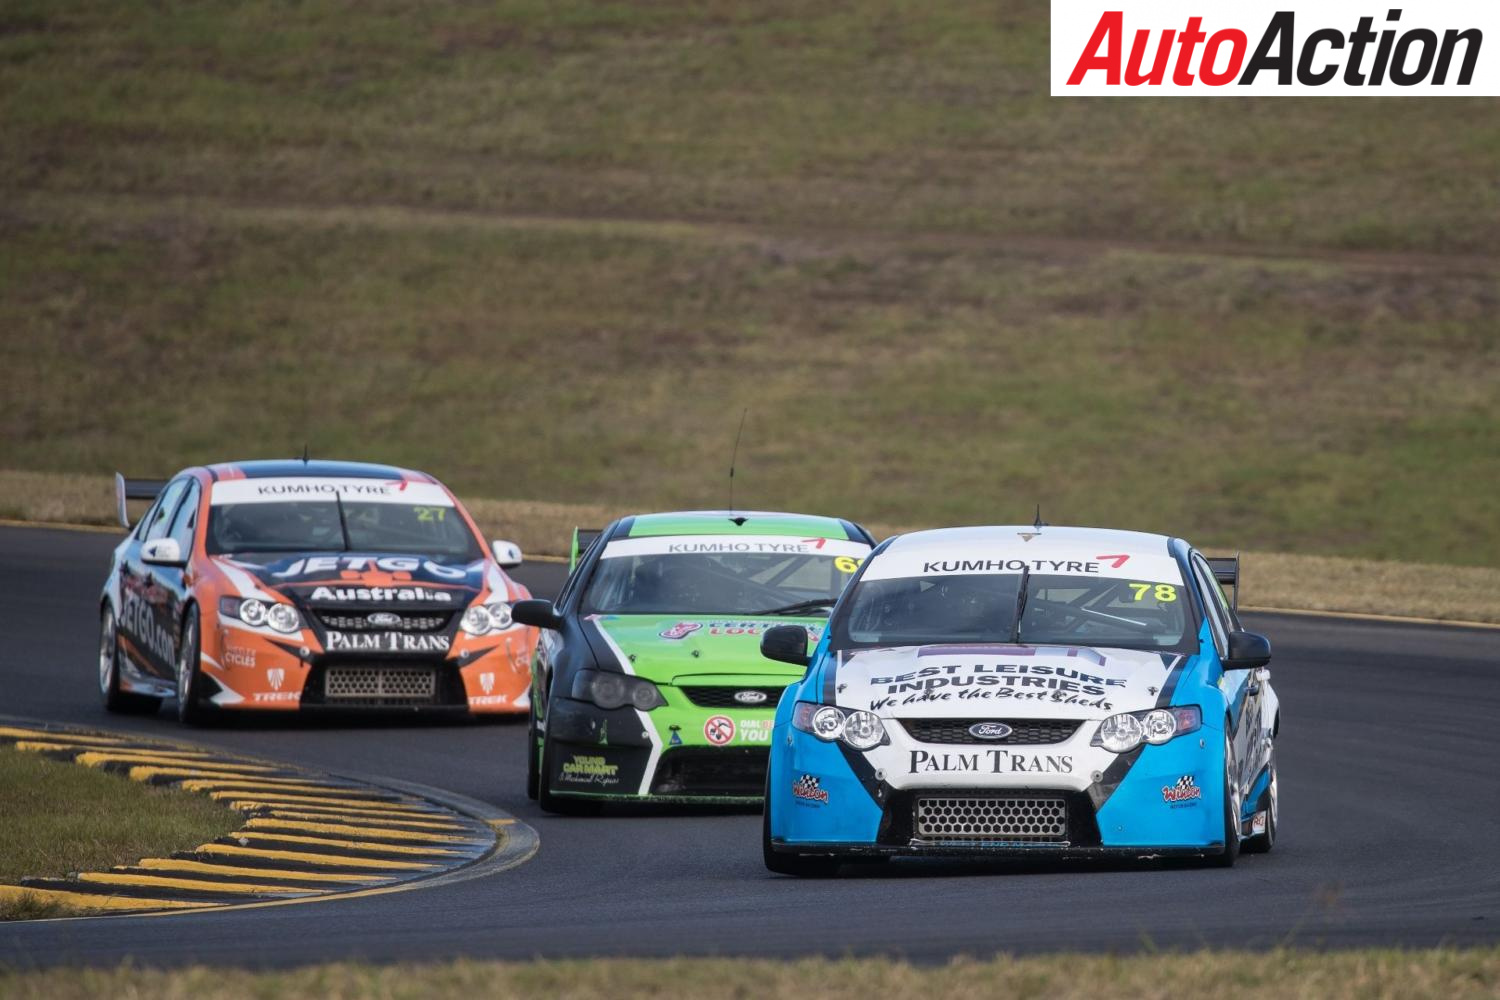 MORE FRESH FACES FOR V8 TOURING CARS AT QR Auto Action